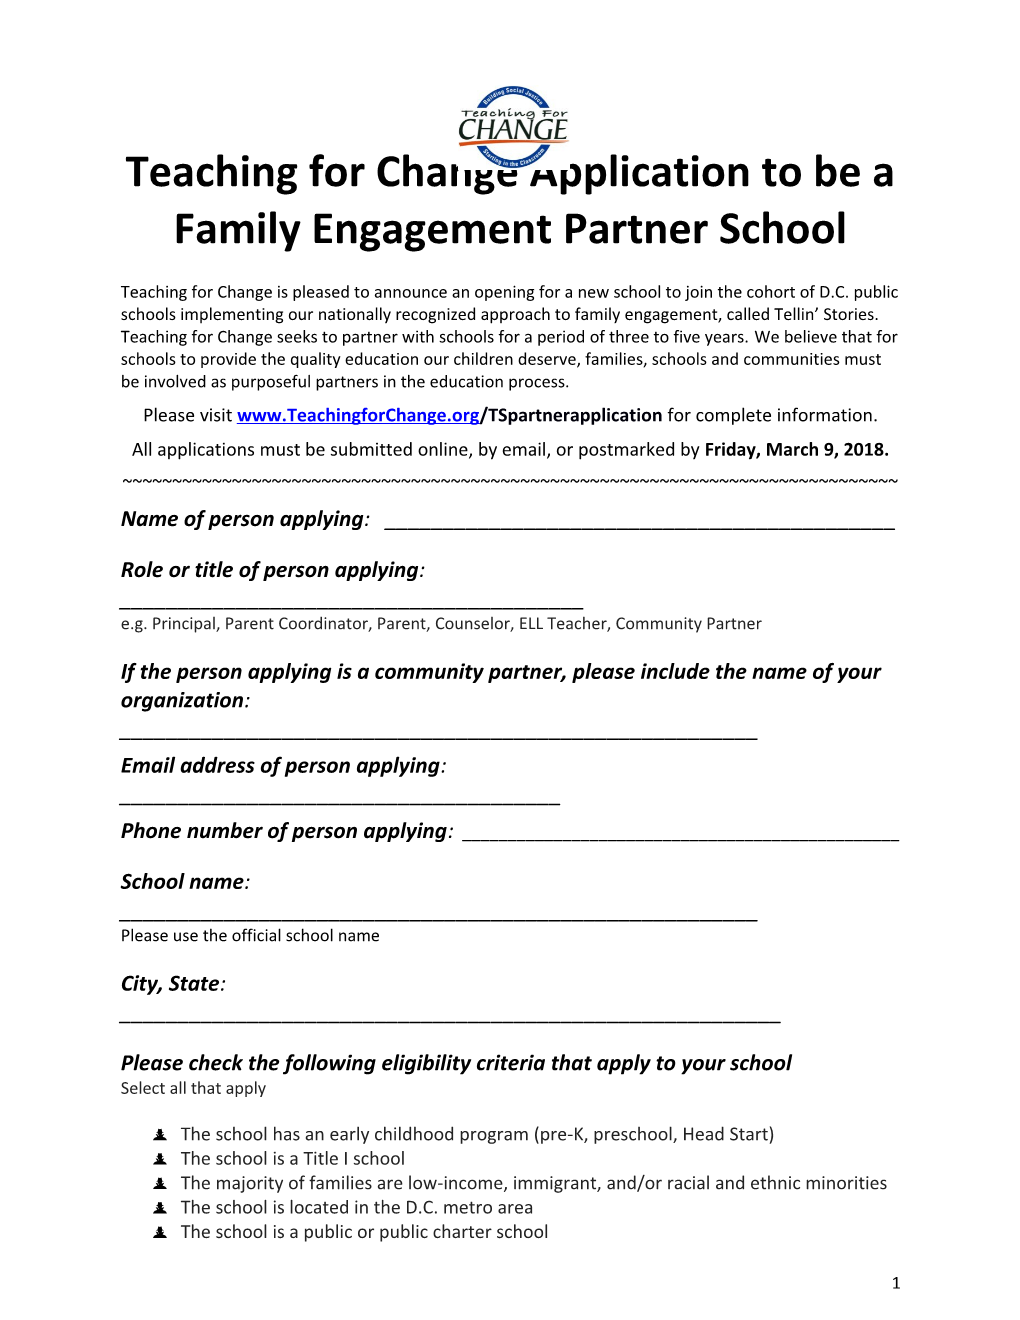 Teaching for Change Application to Be a Family Engagement Partner School